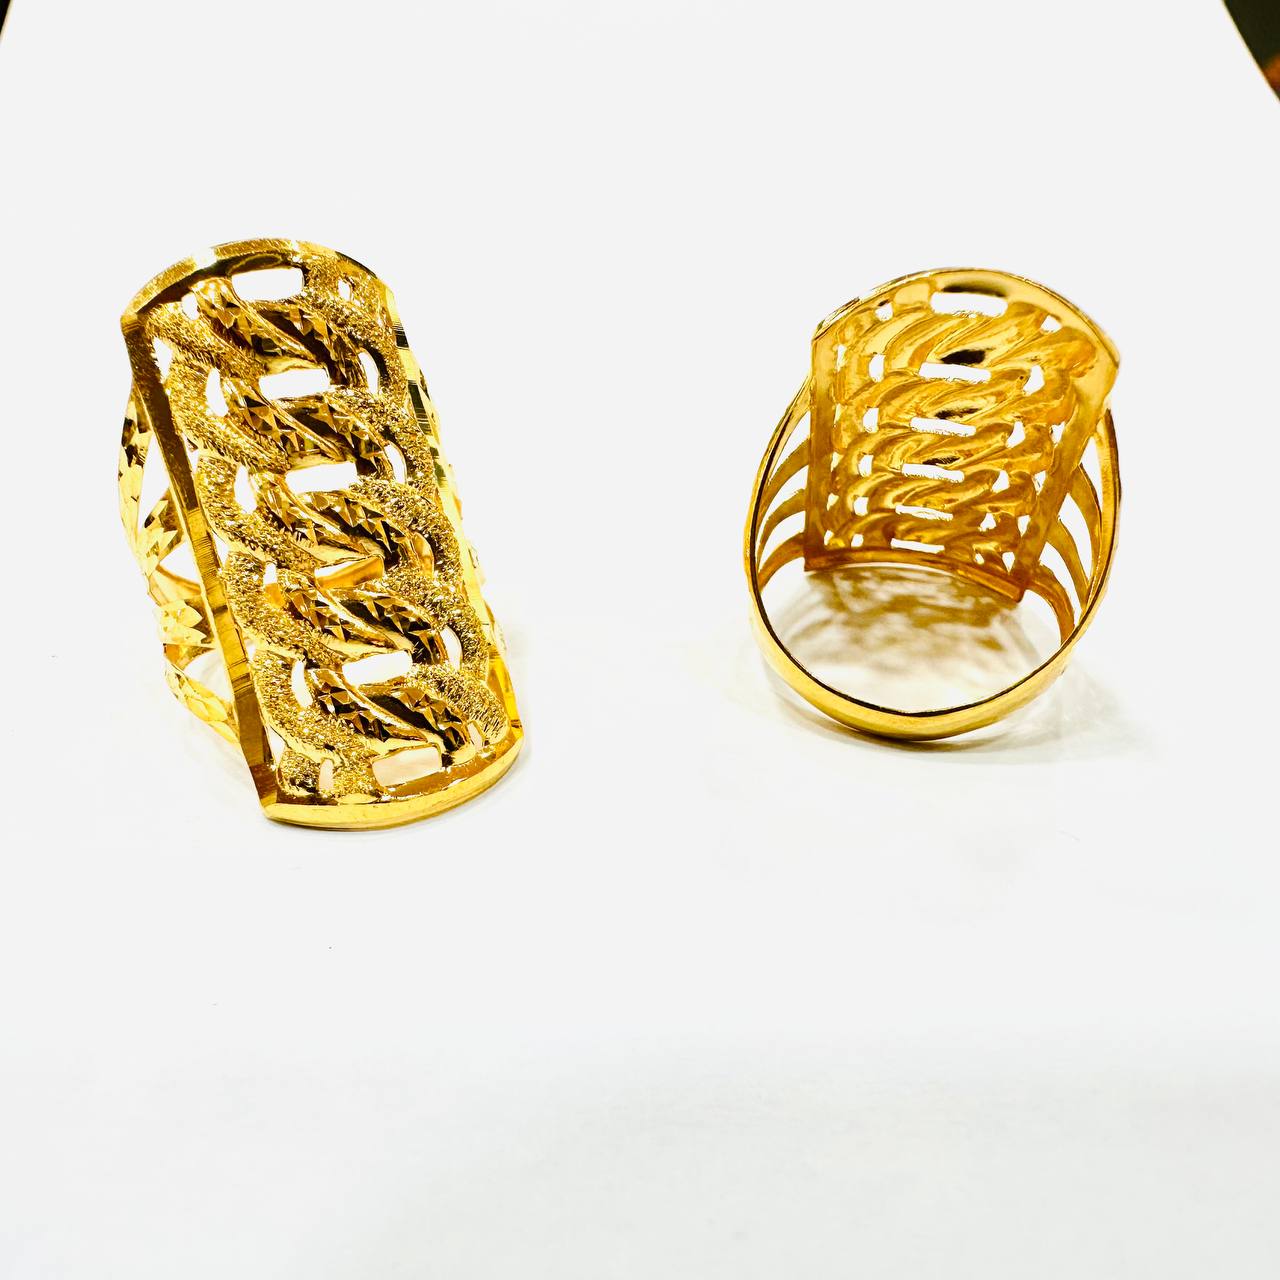 22k / 916 Gold Wide Coco Ring-916 gold-Best Gold Shop